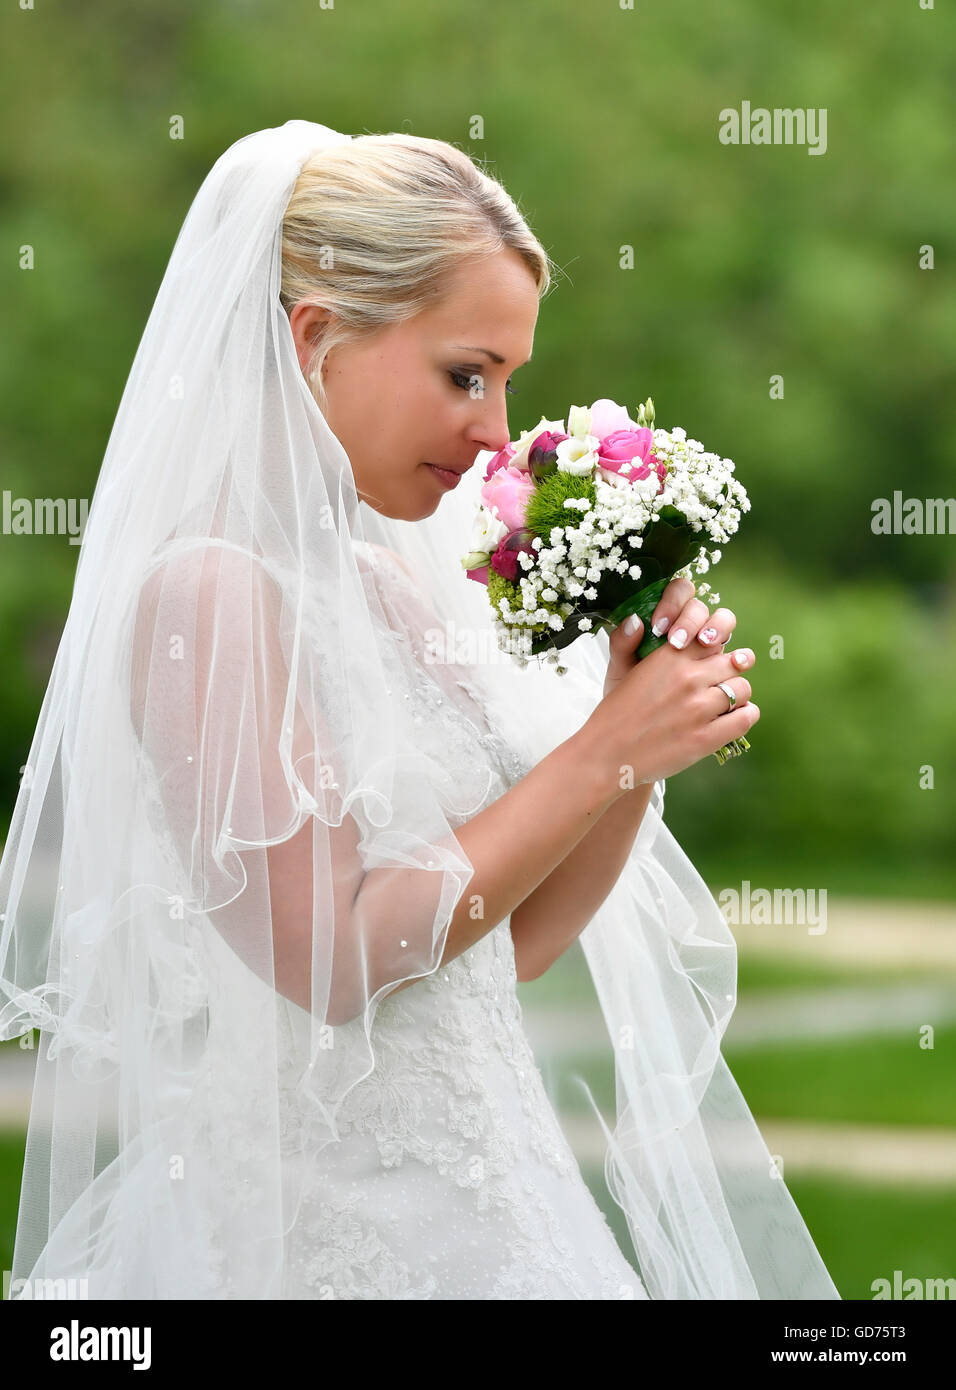 Bride in wedding dress with bridal bouquet and veil, Germany Stock Photo